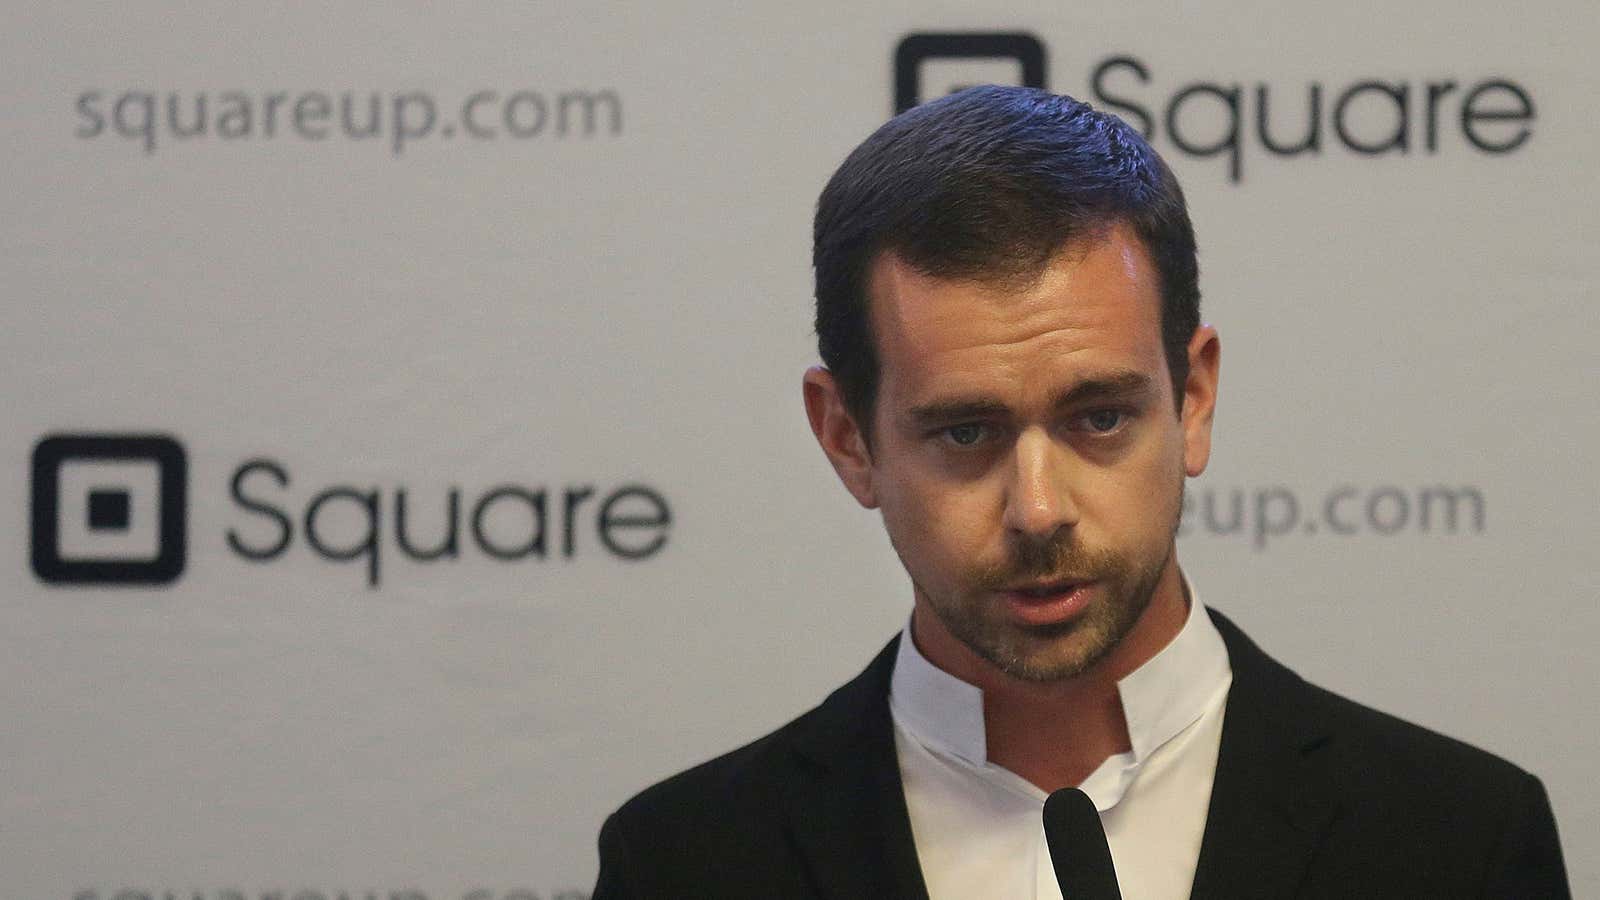 Are you ready to trust Square CEO Jack Dorsey with access to your bank account?